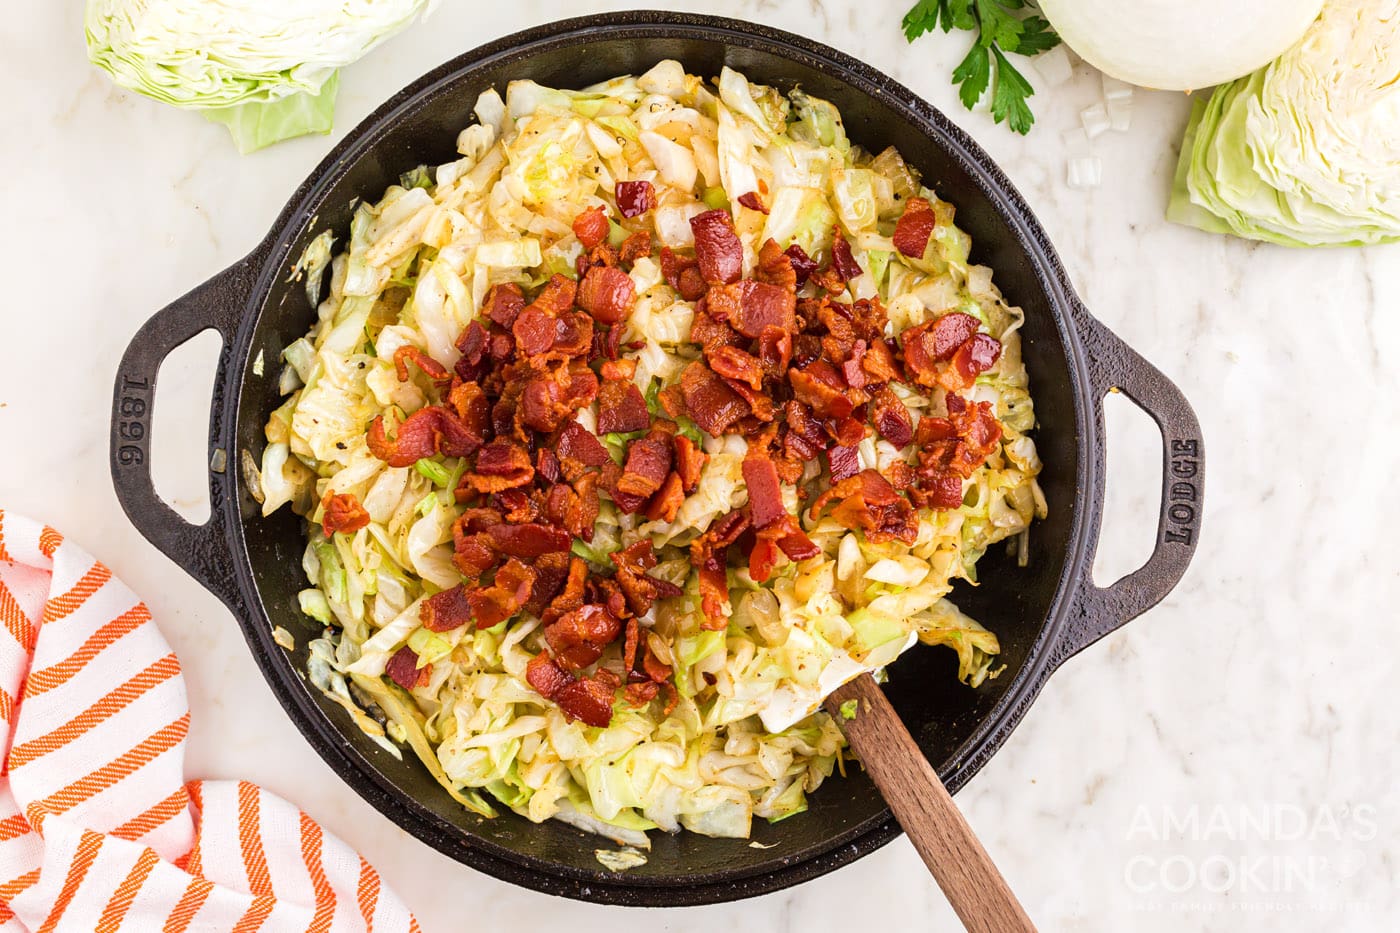 chopped bacon in a skillet with cabbage